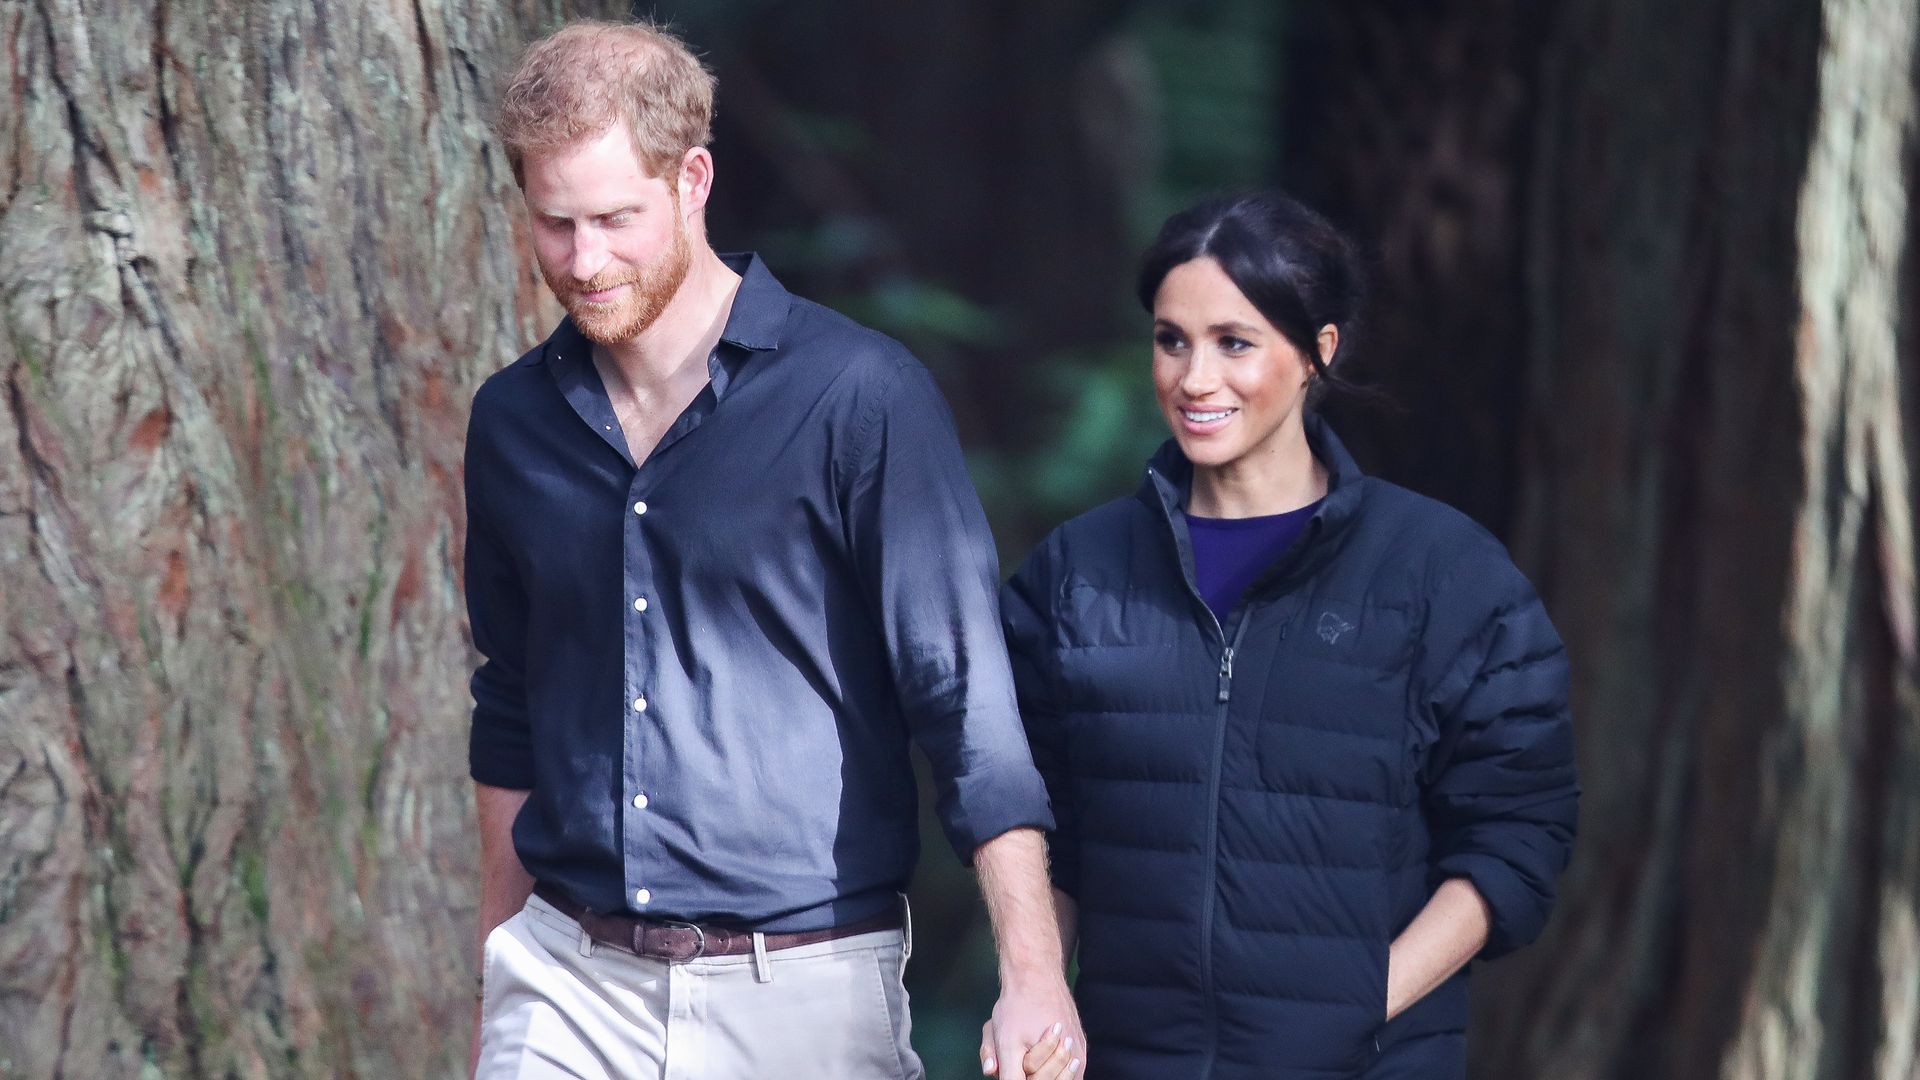 Meghan Markle and Prince Harry hiking in New Zealand